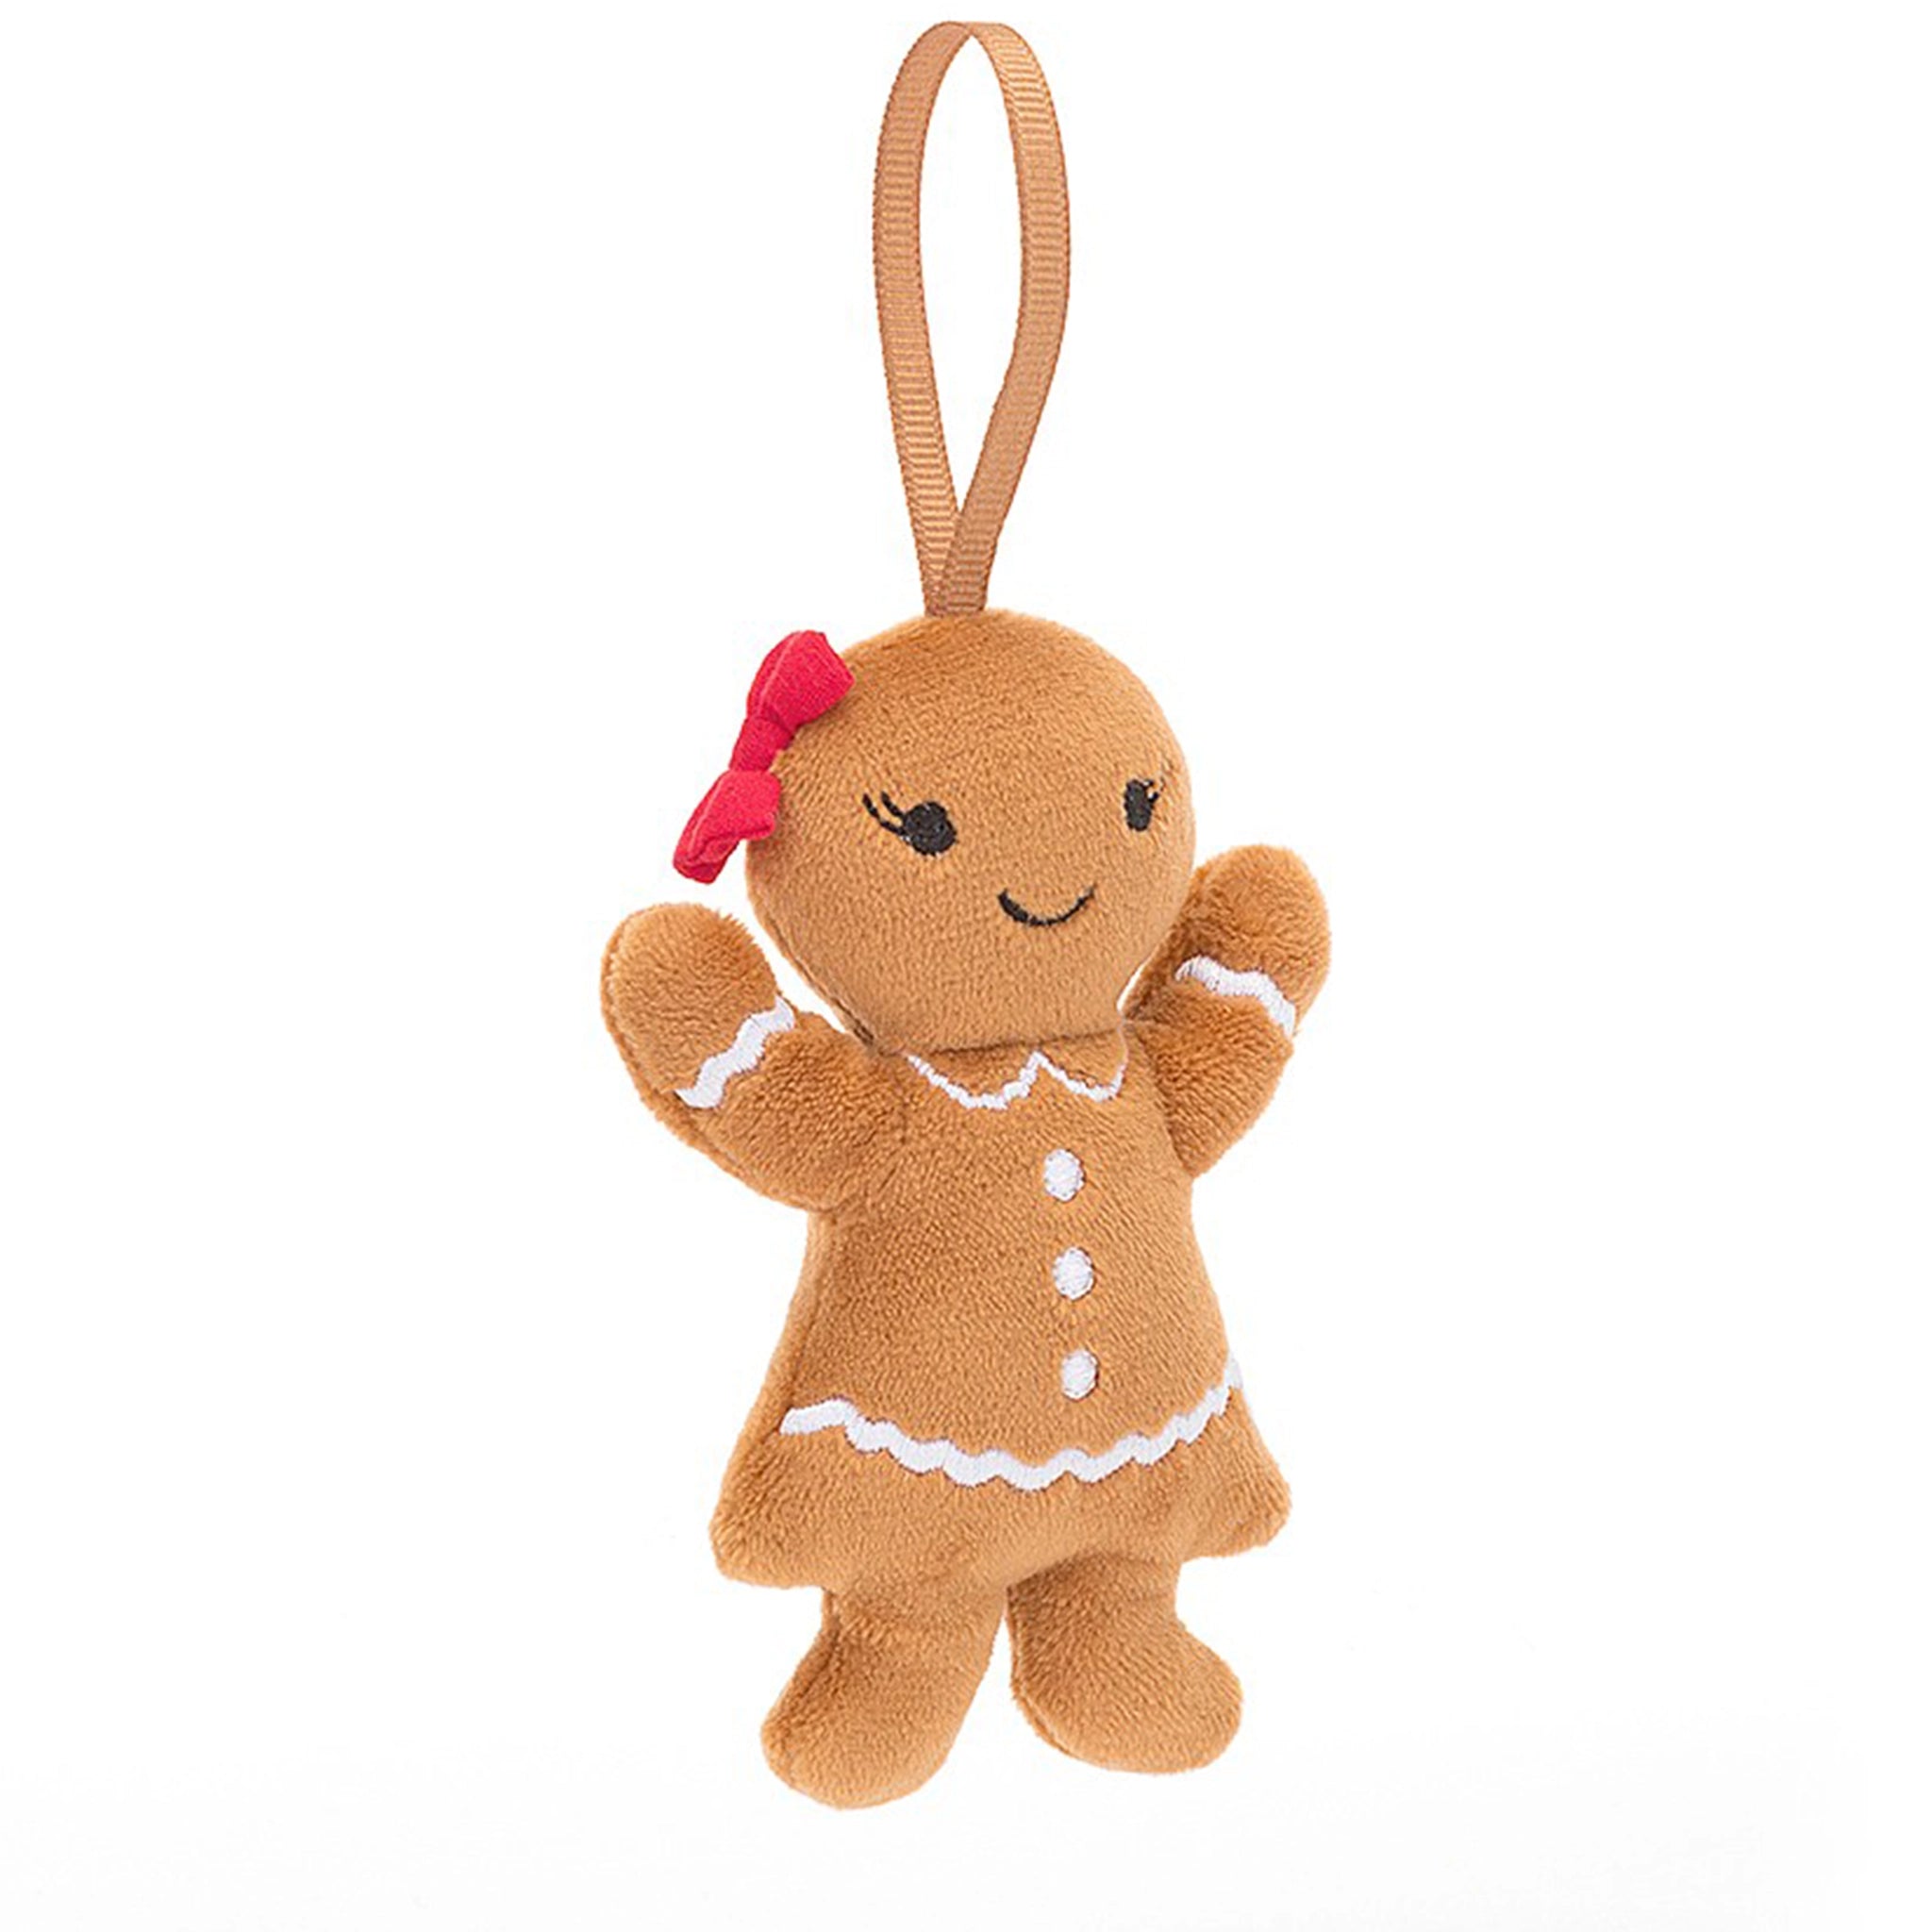 On a white background is a brown gingerbread shaped stuffed toy with a smiling face, white detailing and a red bow on her head. 